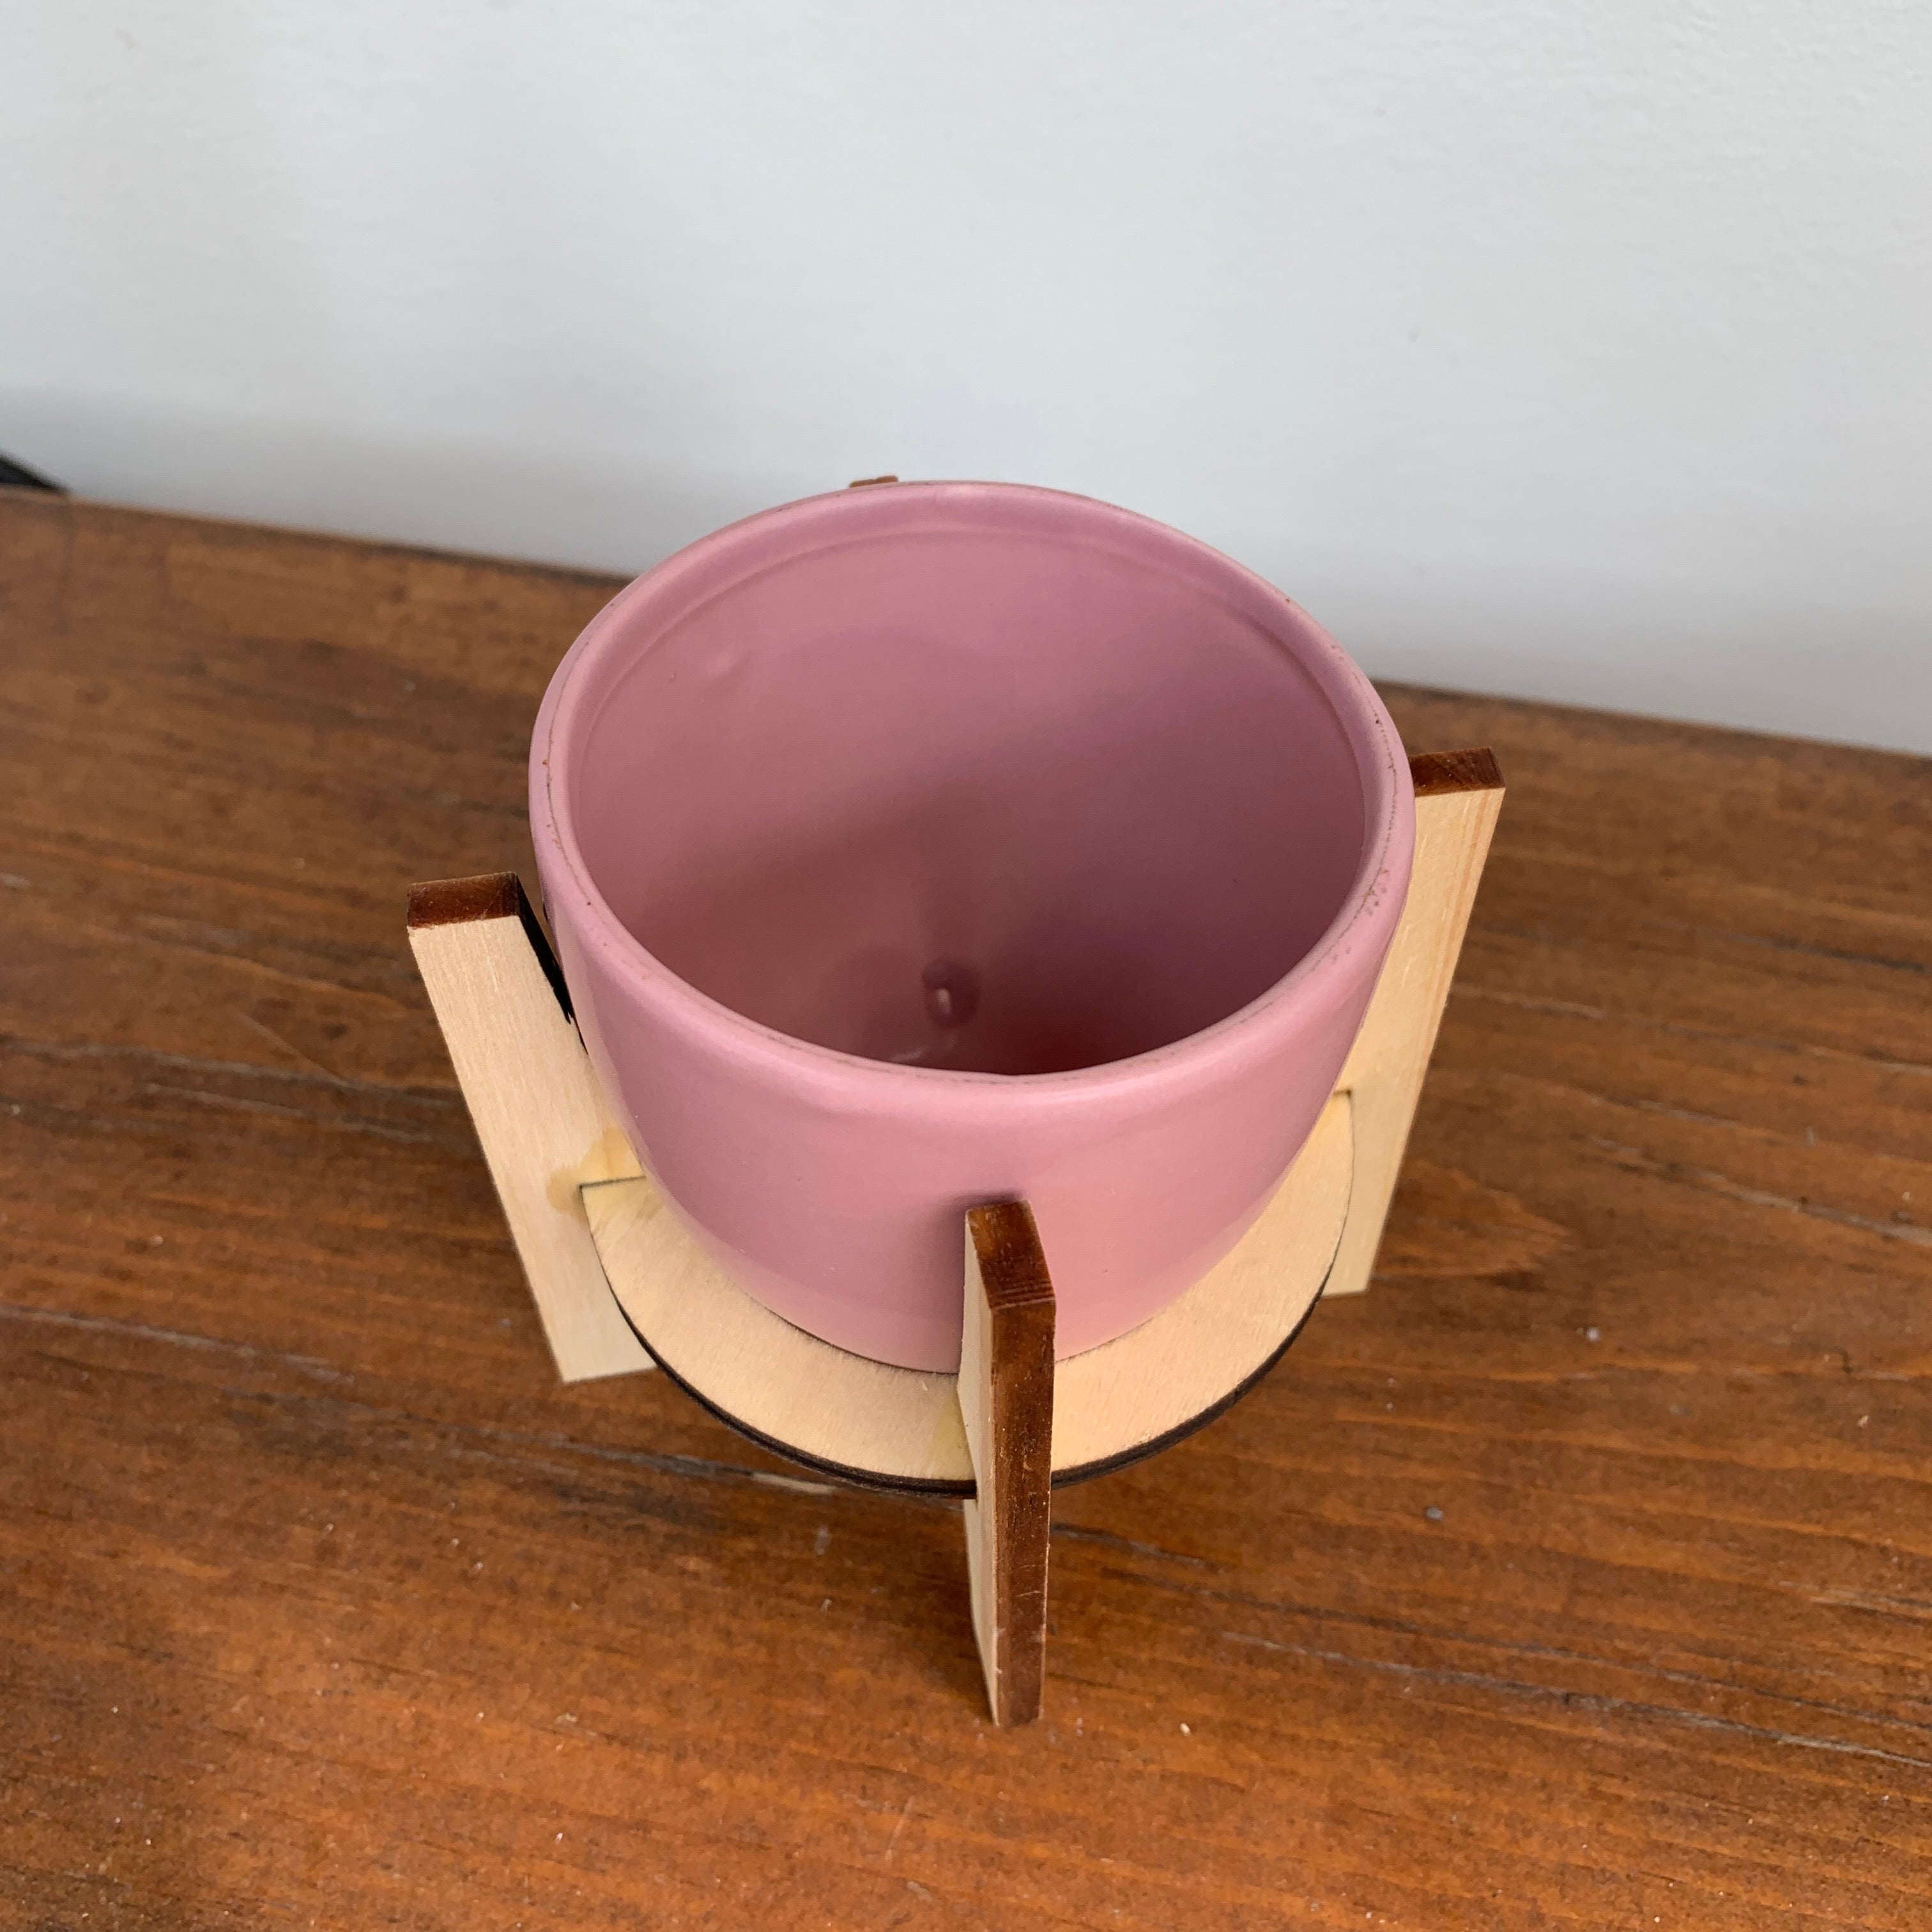 Finland Pot with Wooden Stand - Pink